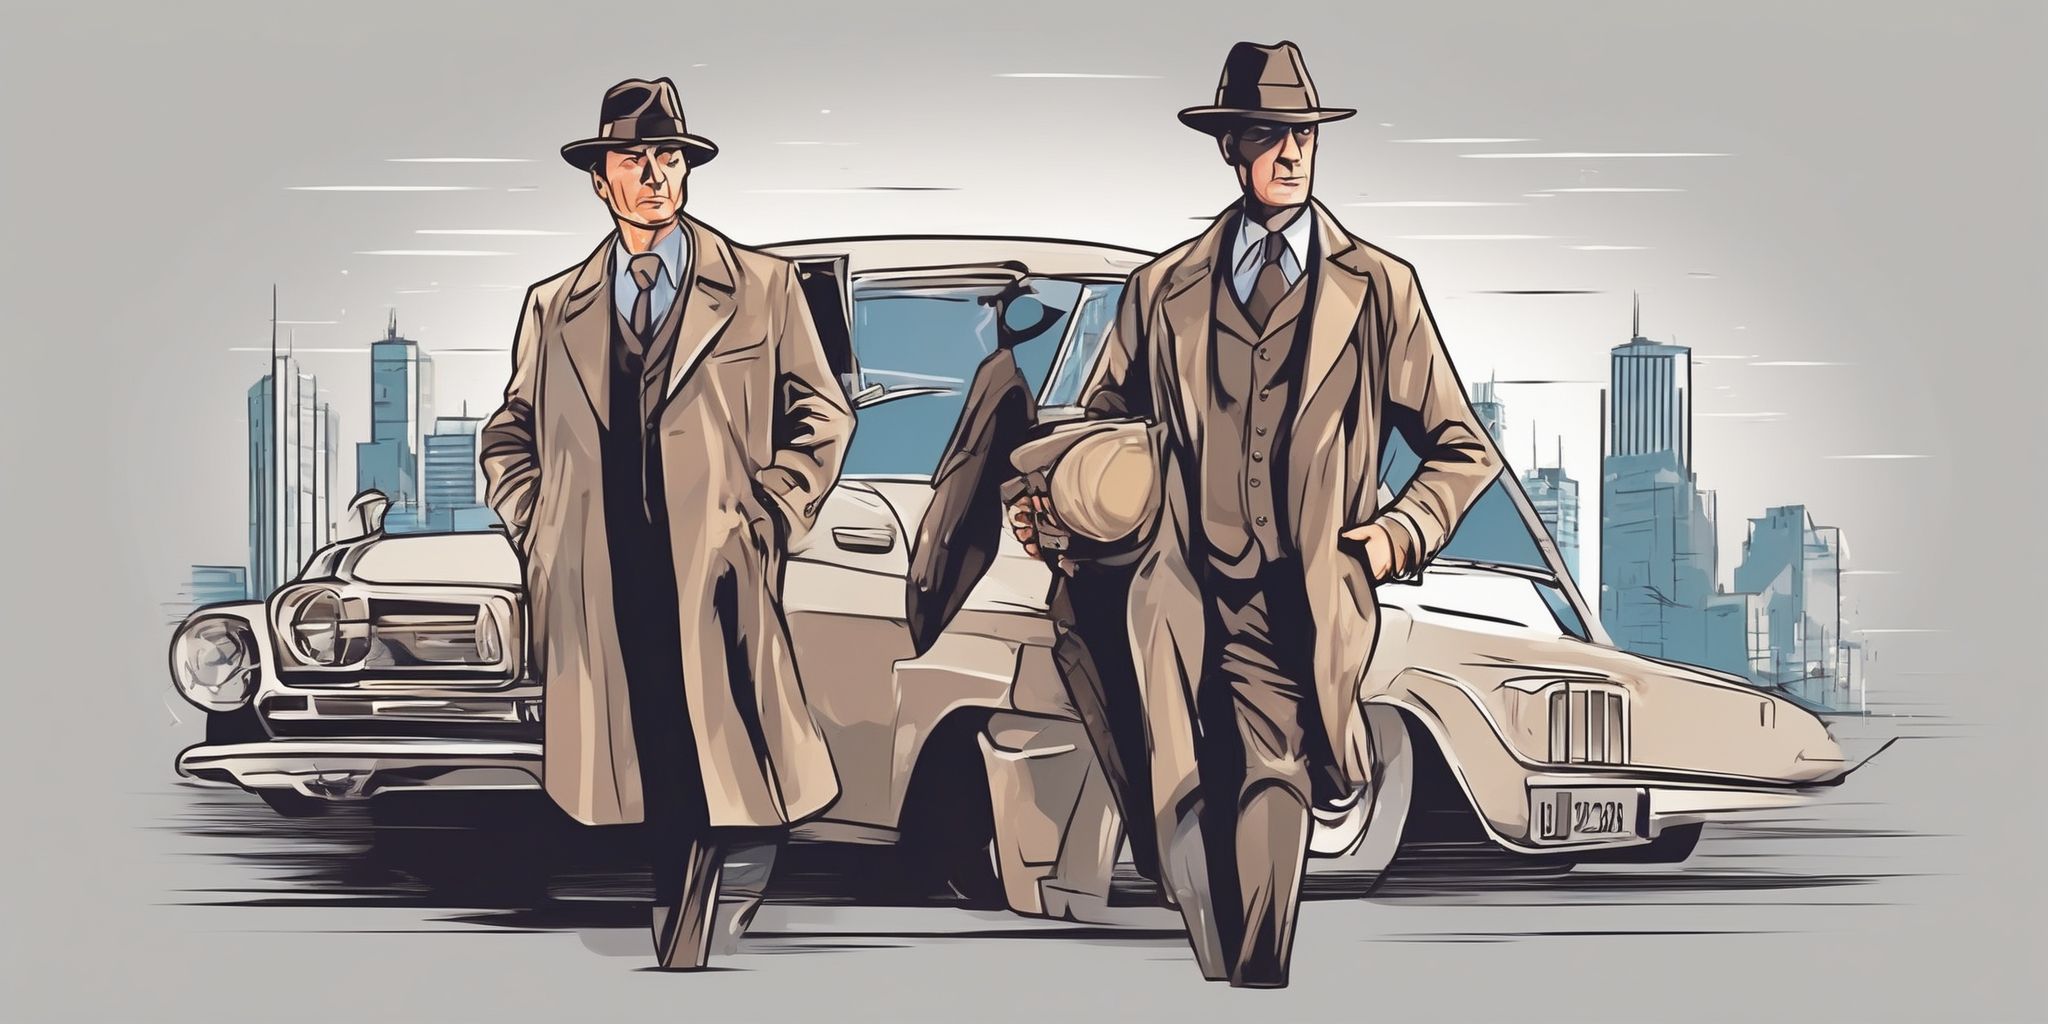 detective in illustration style with gradients and white background